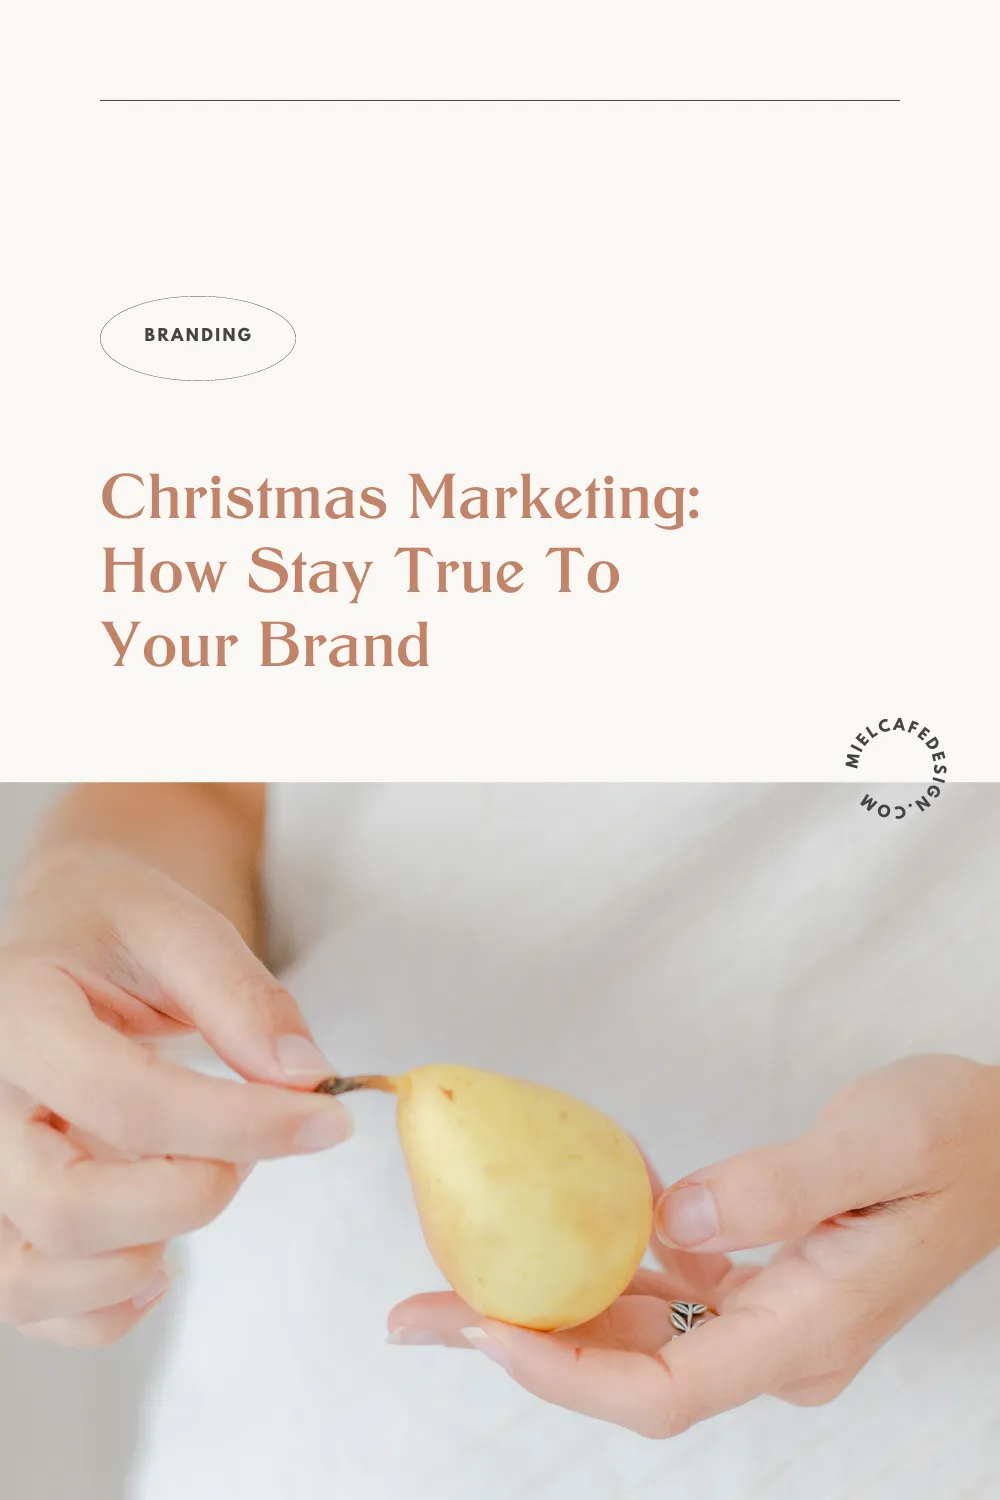 Christmas Marketing: 4 tips to Stay True To Your Brand during the festive season